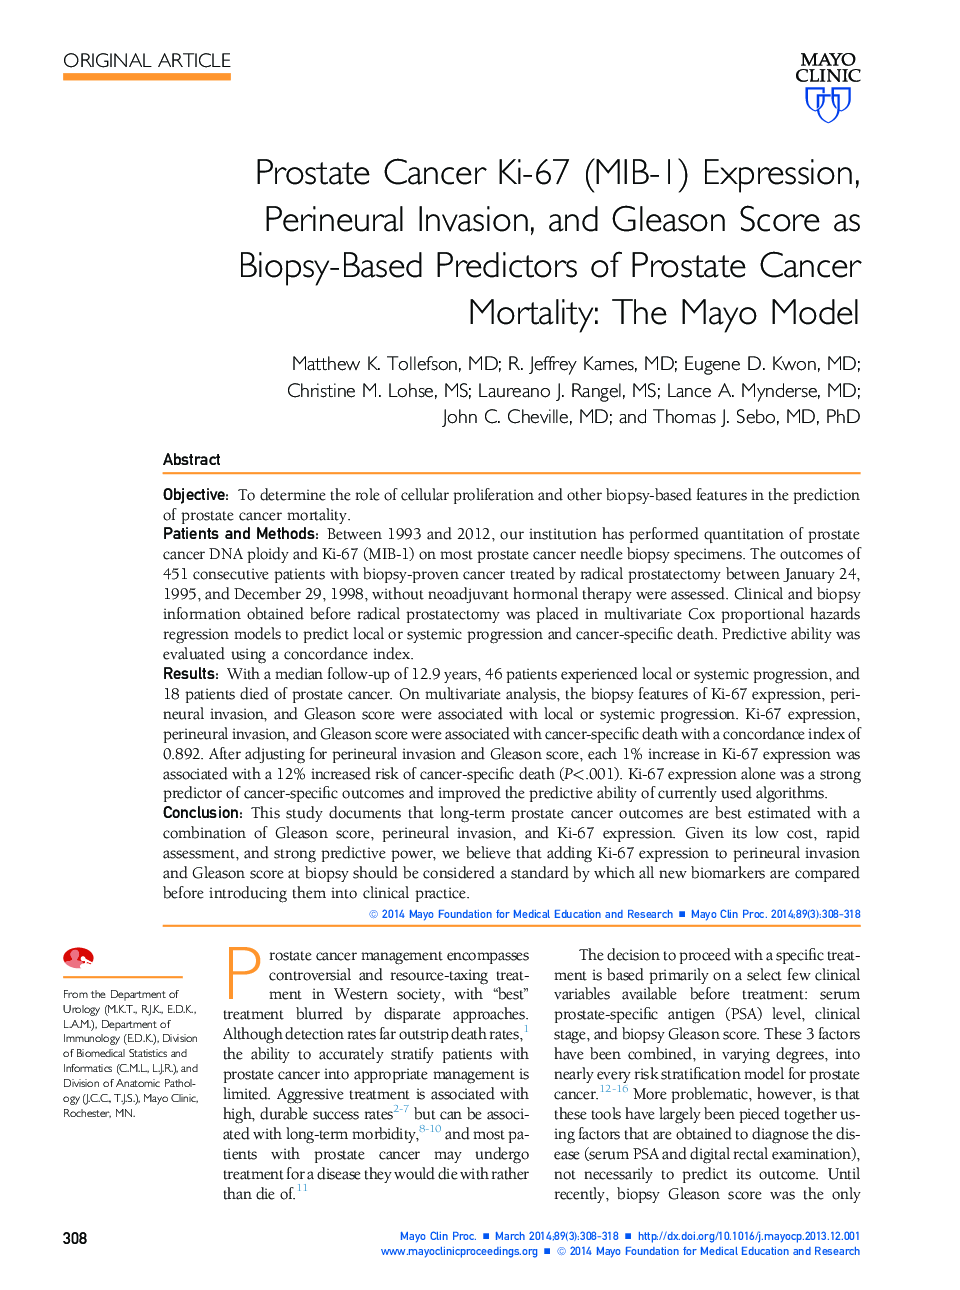 Prostate Cancer Ki-67 (MIB-1) Expression, Perineural Invasion, and Gleason Score as Biopsy-Based Predictors of Prostate Cancer Mortality: The Mayo Model